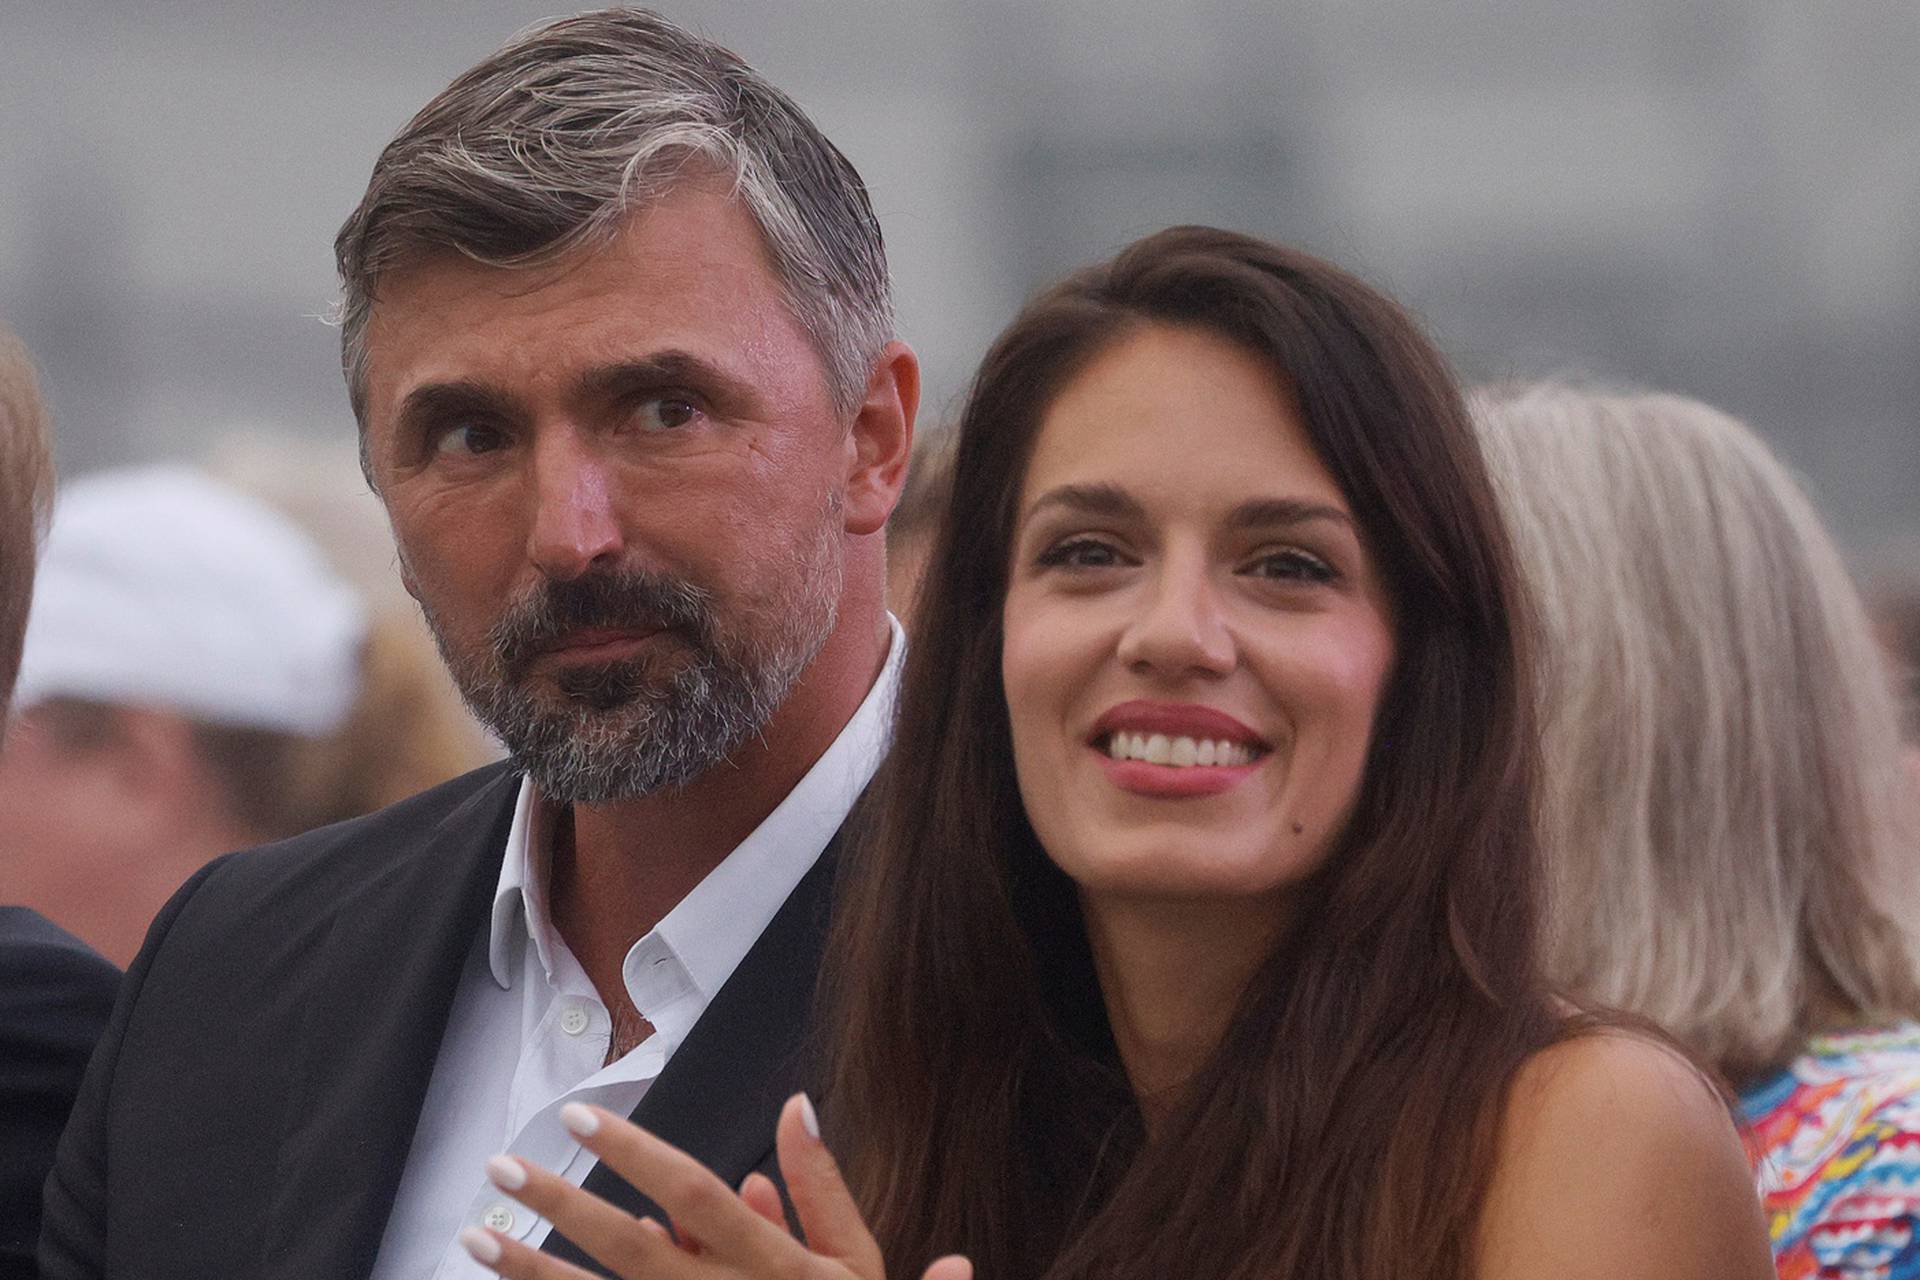 Goran Ivanisevic of Croatia is inducted into the International Tennis Hall of Fame in Newport